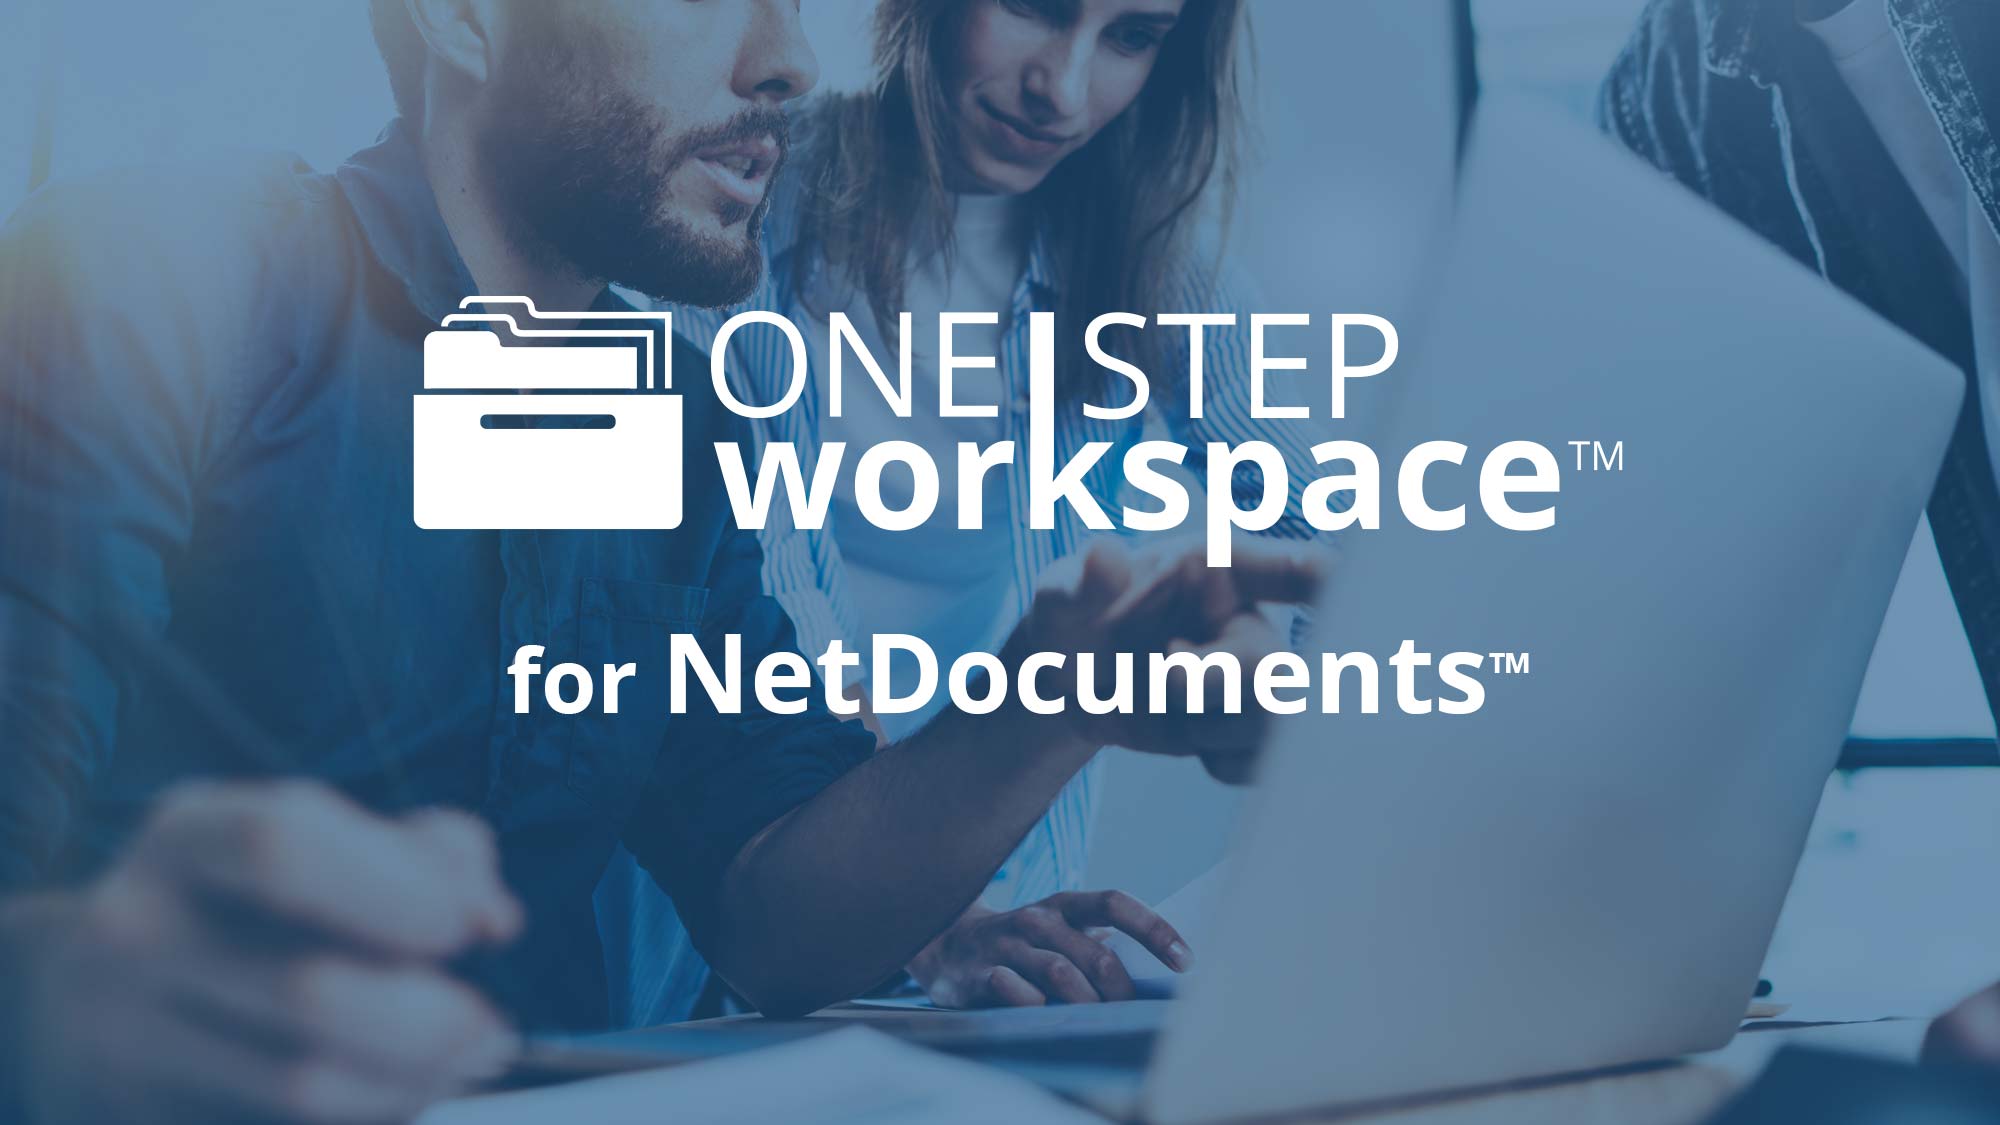 "One Step Workspace for NetDocuments" logo over man and woman with computer